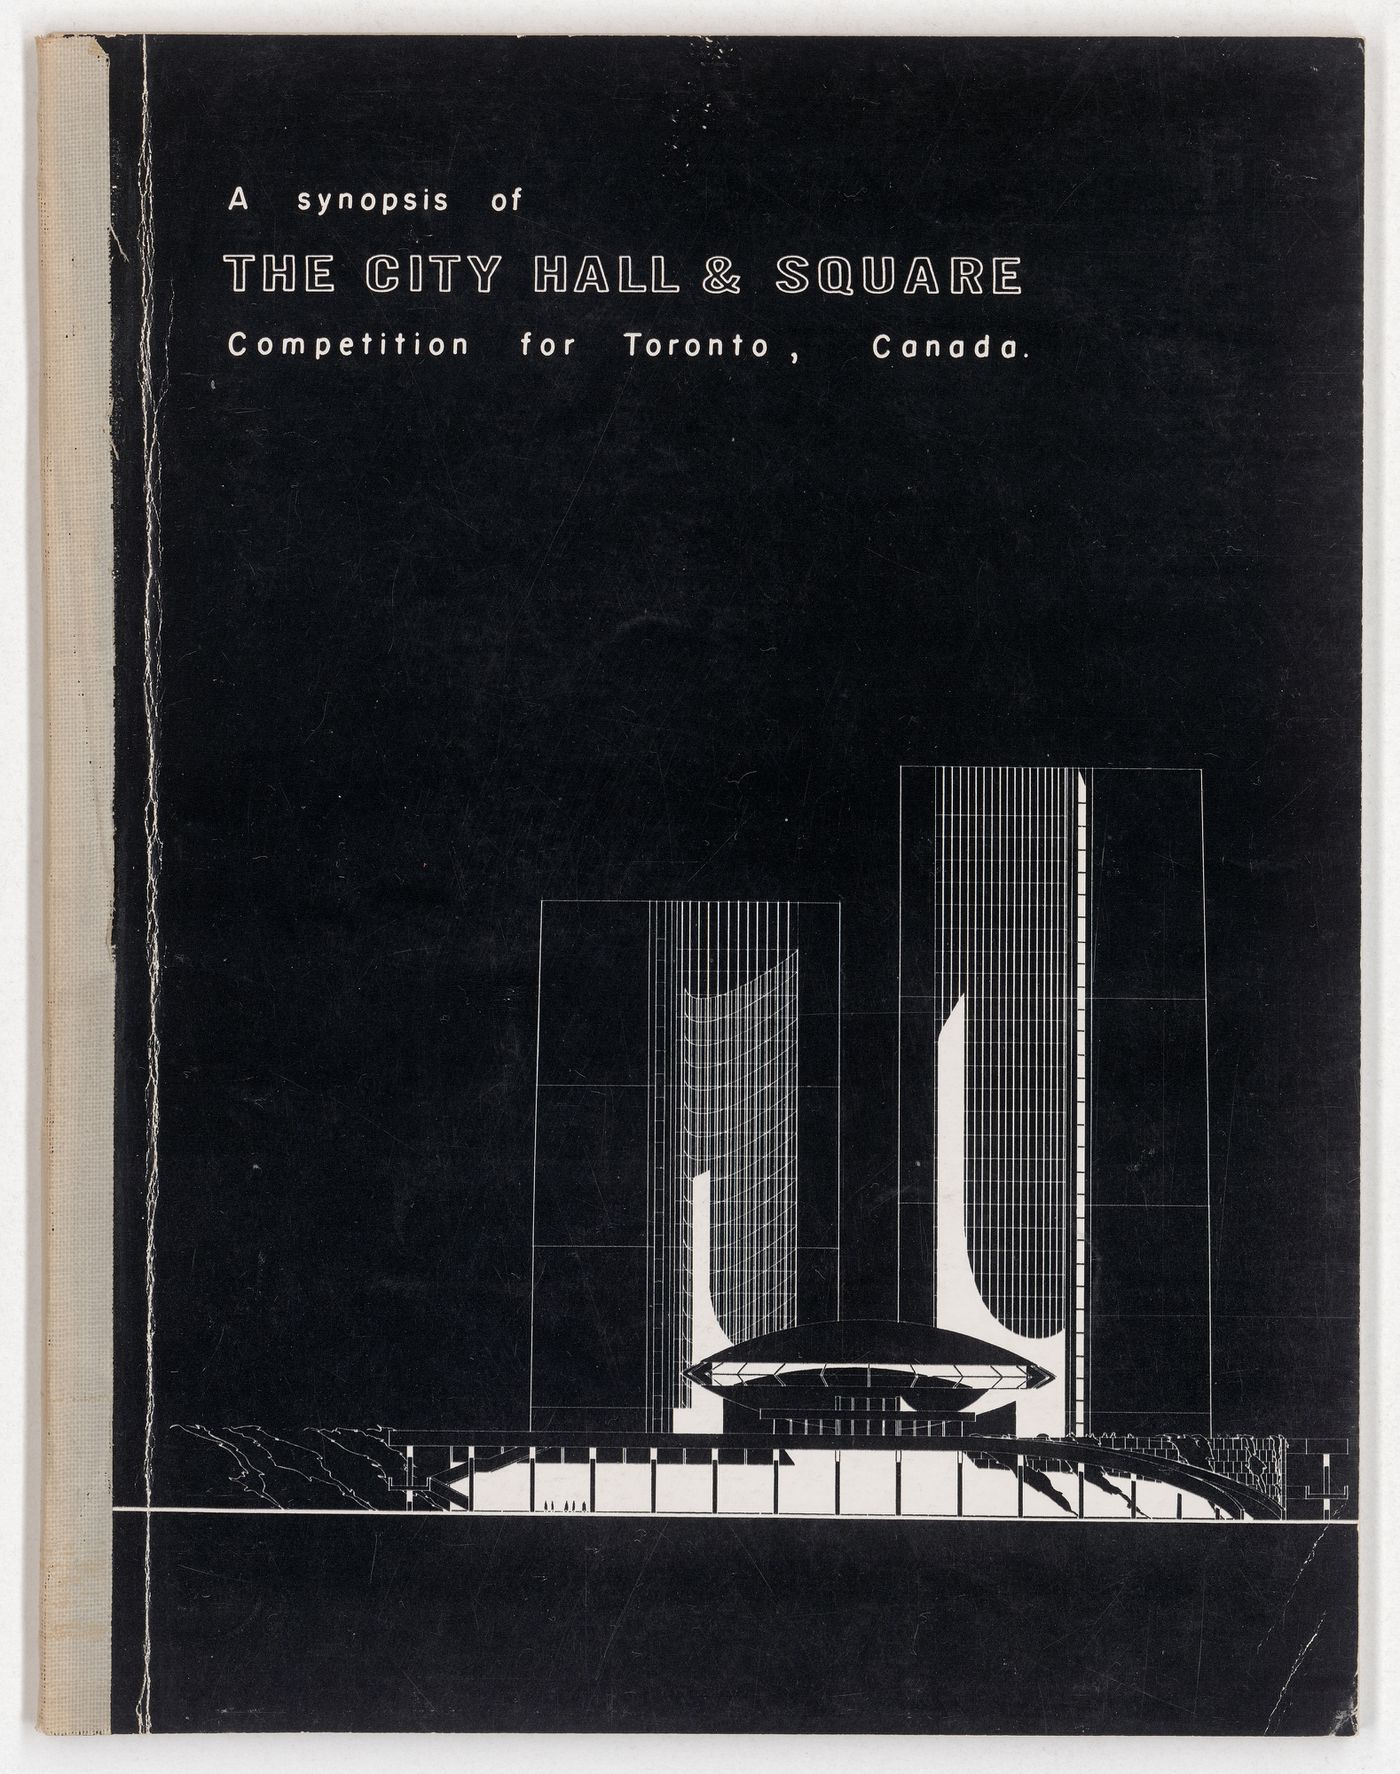 "A synopsis of The City Hall & Square Competition for Toronto, Canada" book